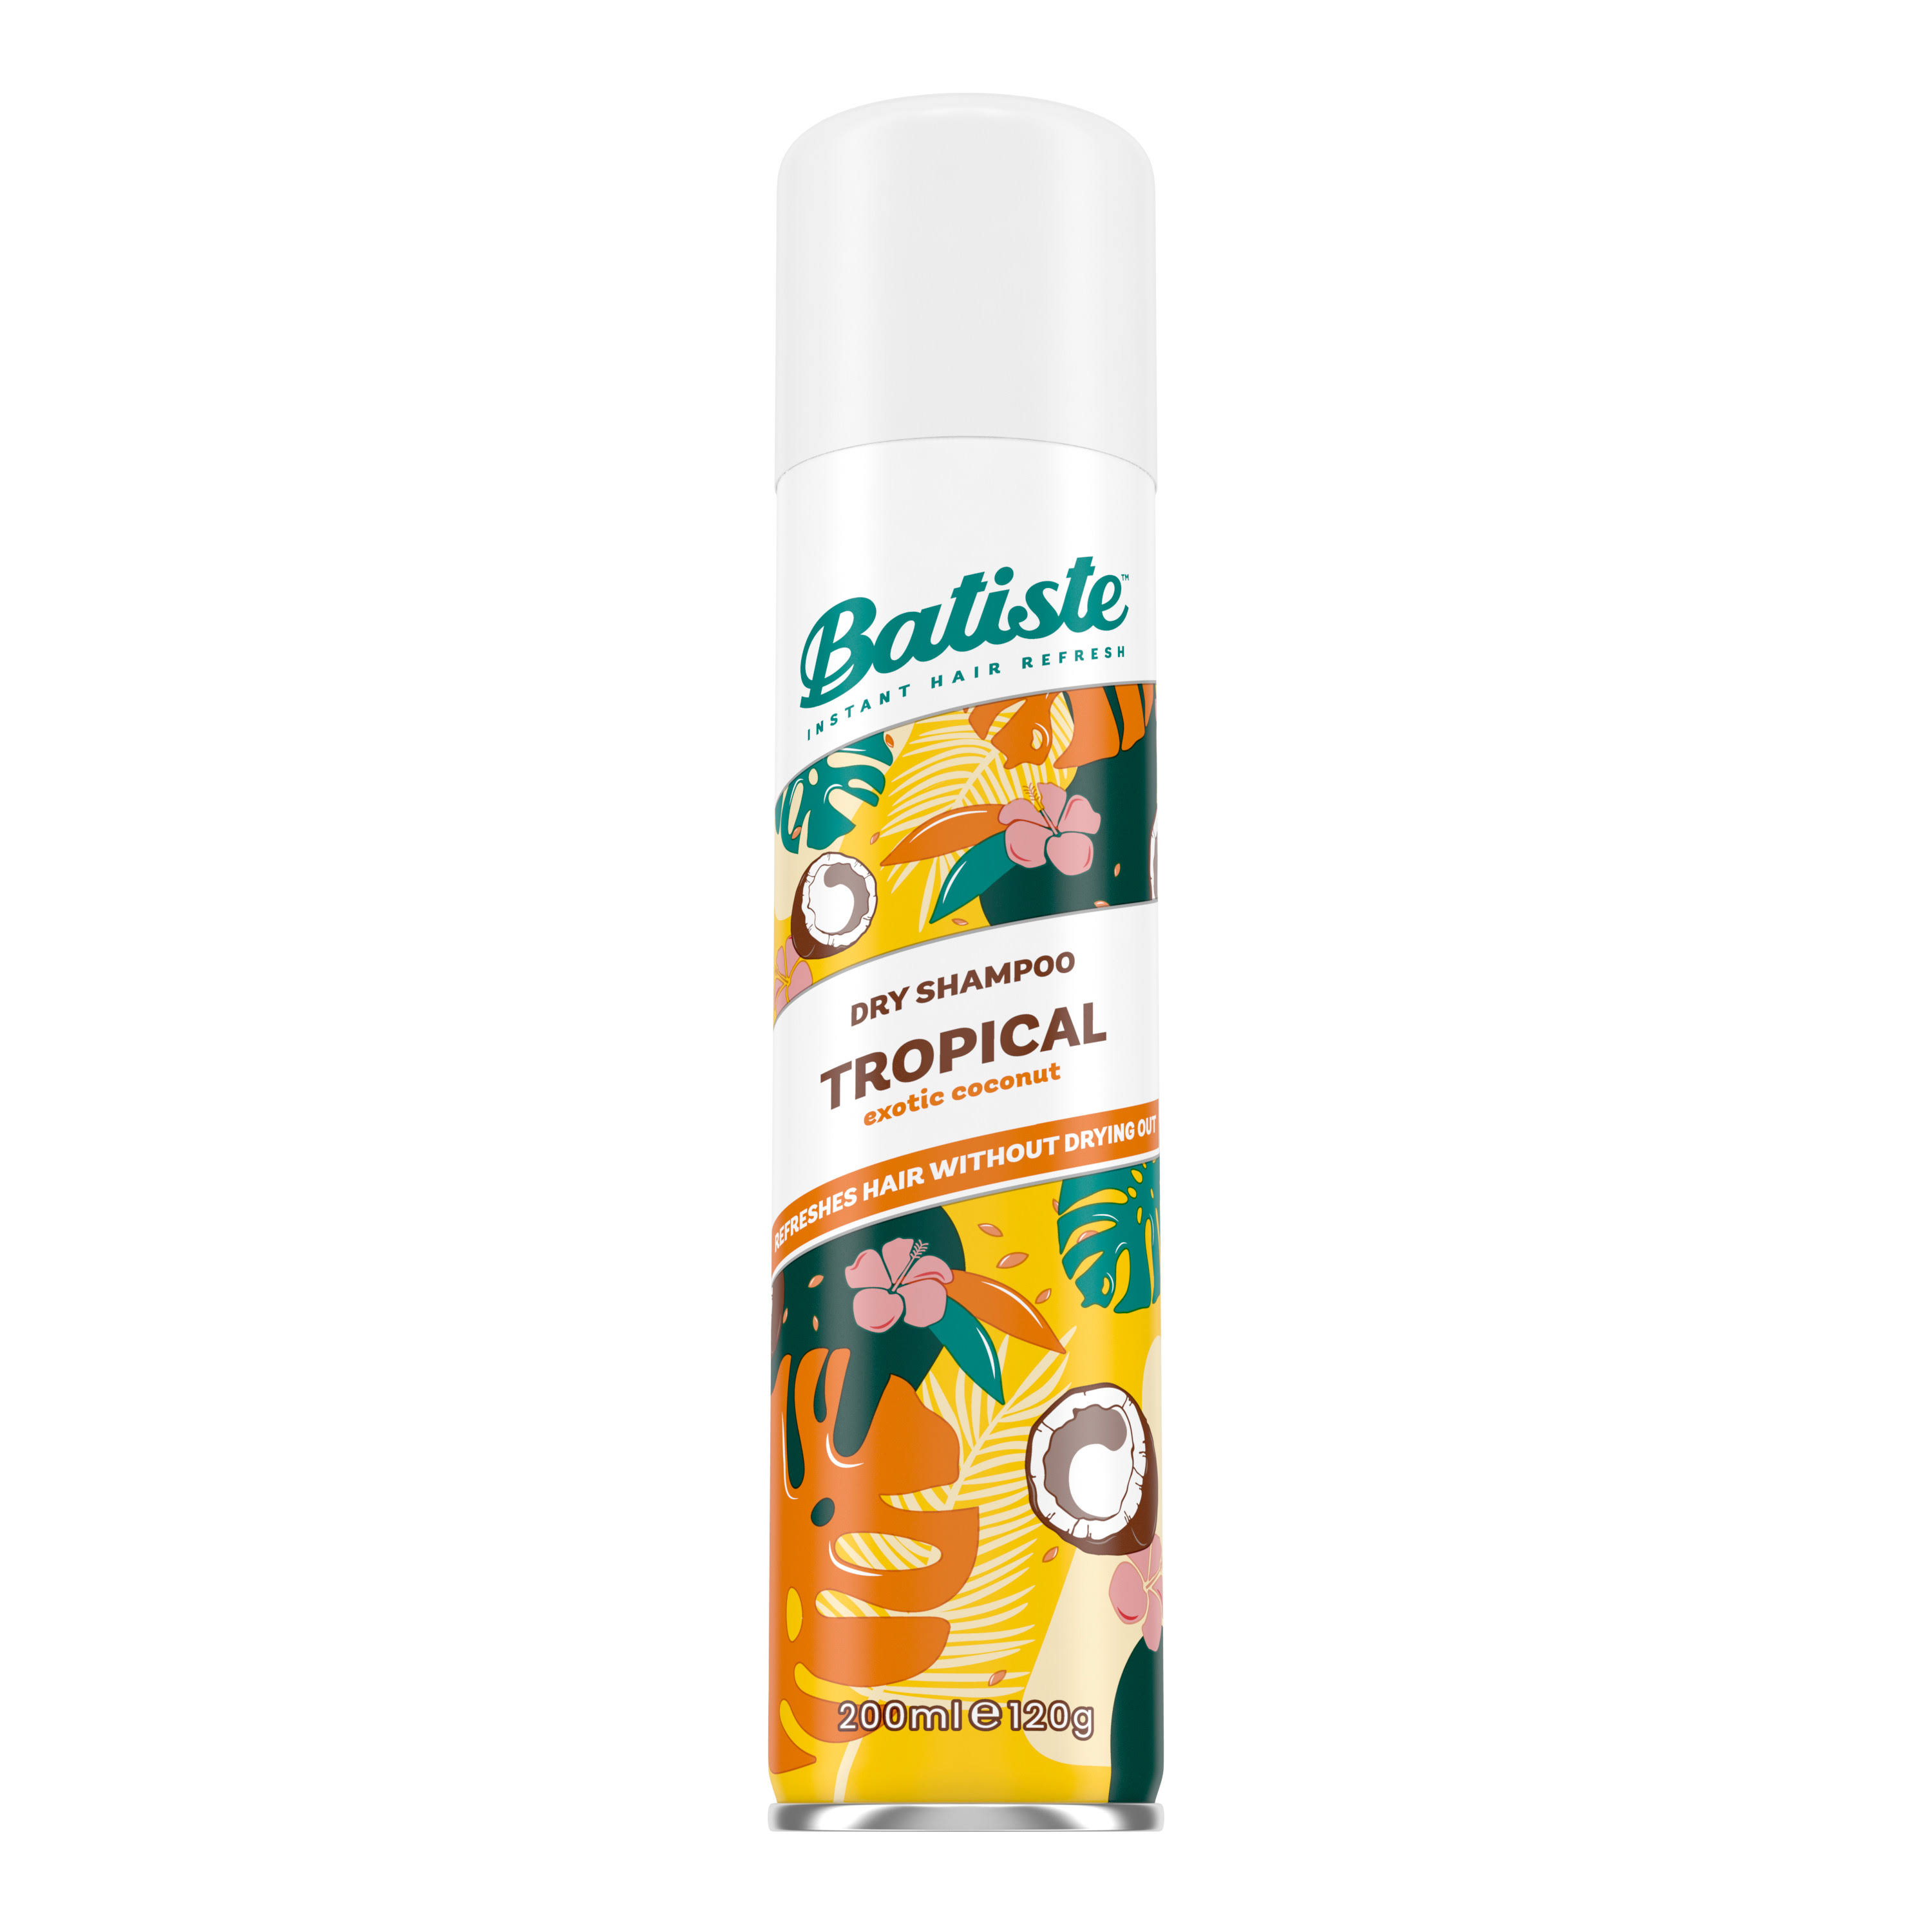 Batiste Dry Shampoo - Coconut and Exotic Tropical, 200ml